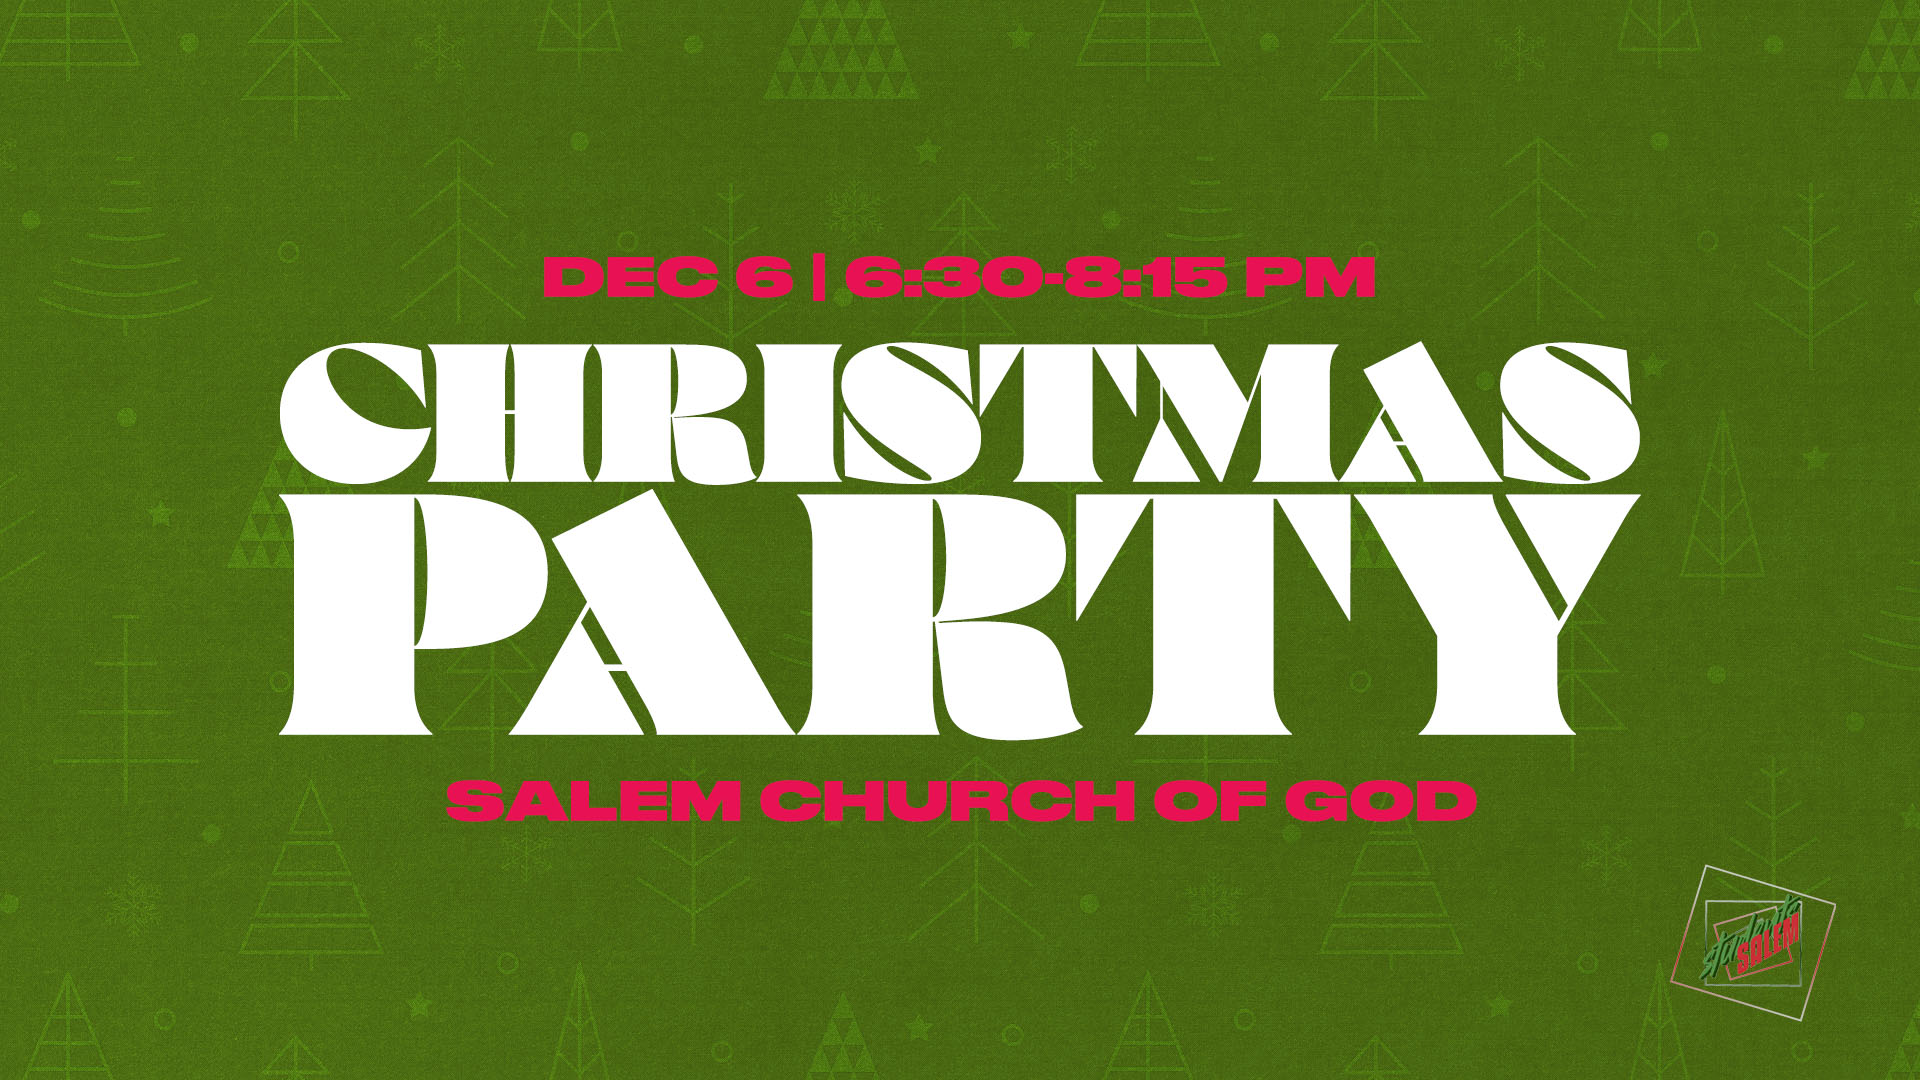 Featured image for “Salem Students Christmas Party”